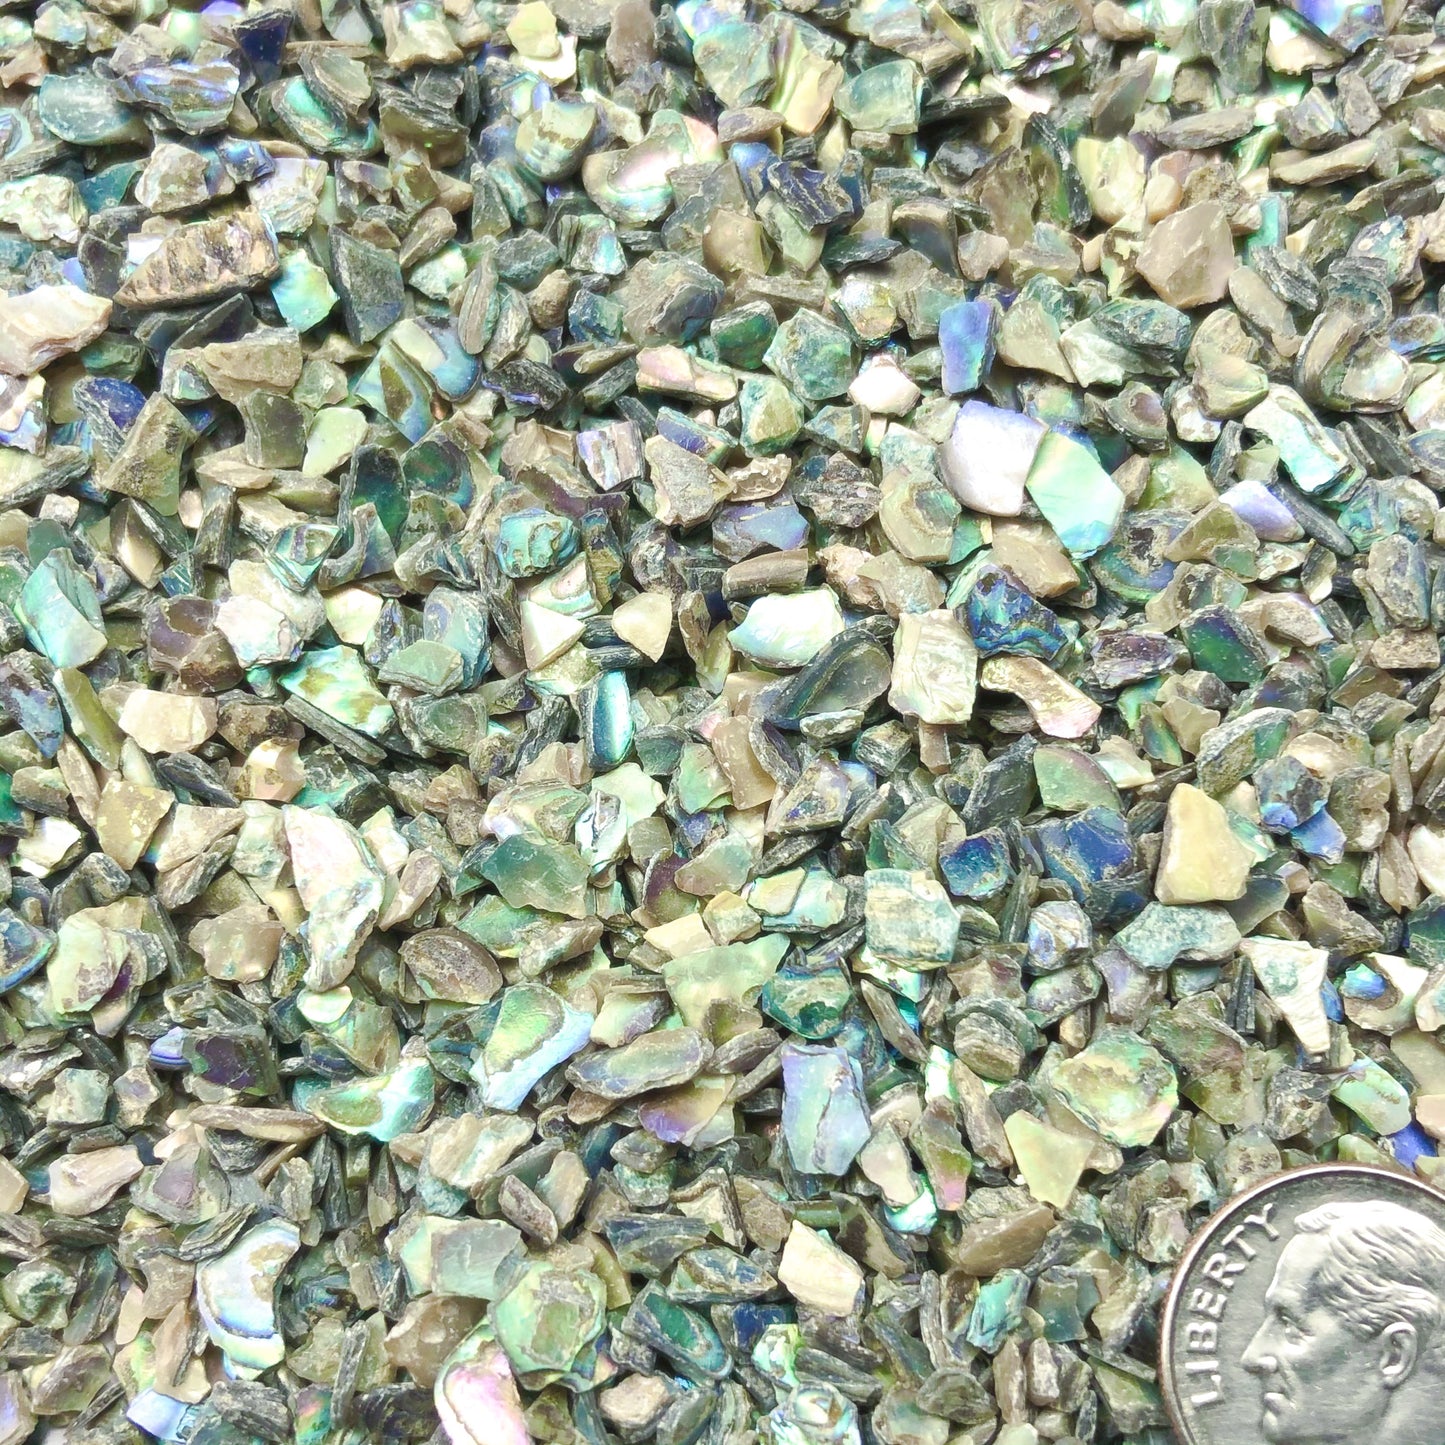 Crushed Iridescent Abalone (Paua) from the Gulf of Mexico, Coarse Crush, Gravel Size, 4mm - 2mm